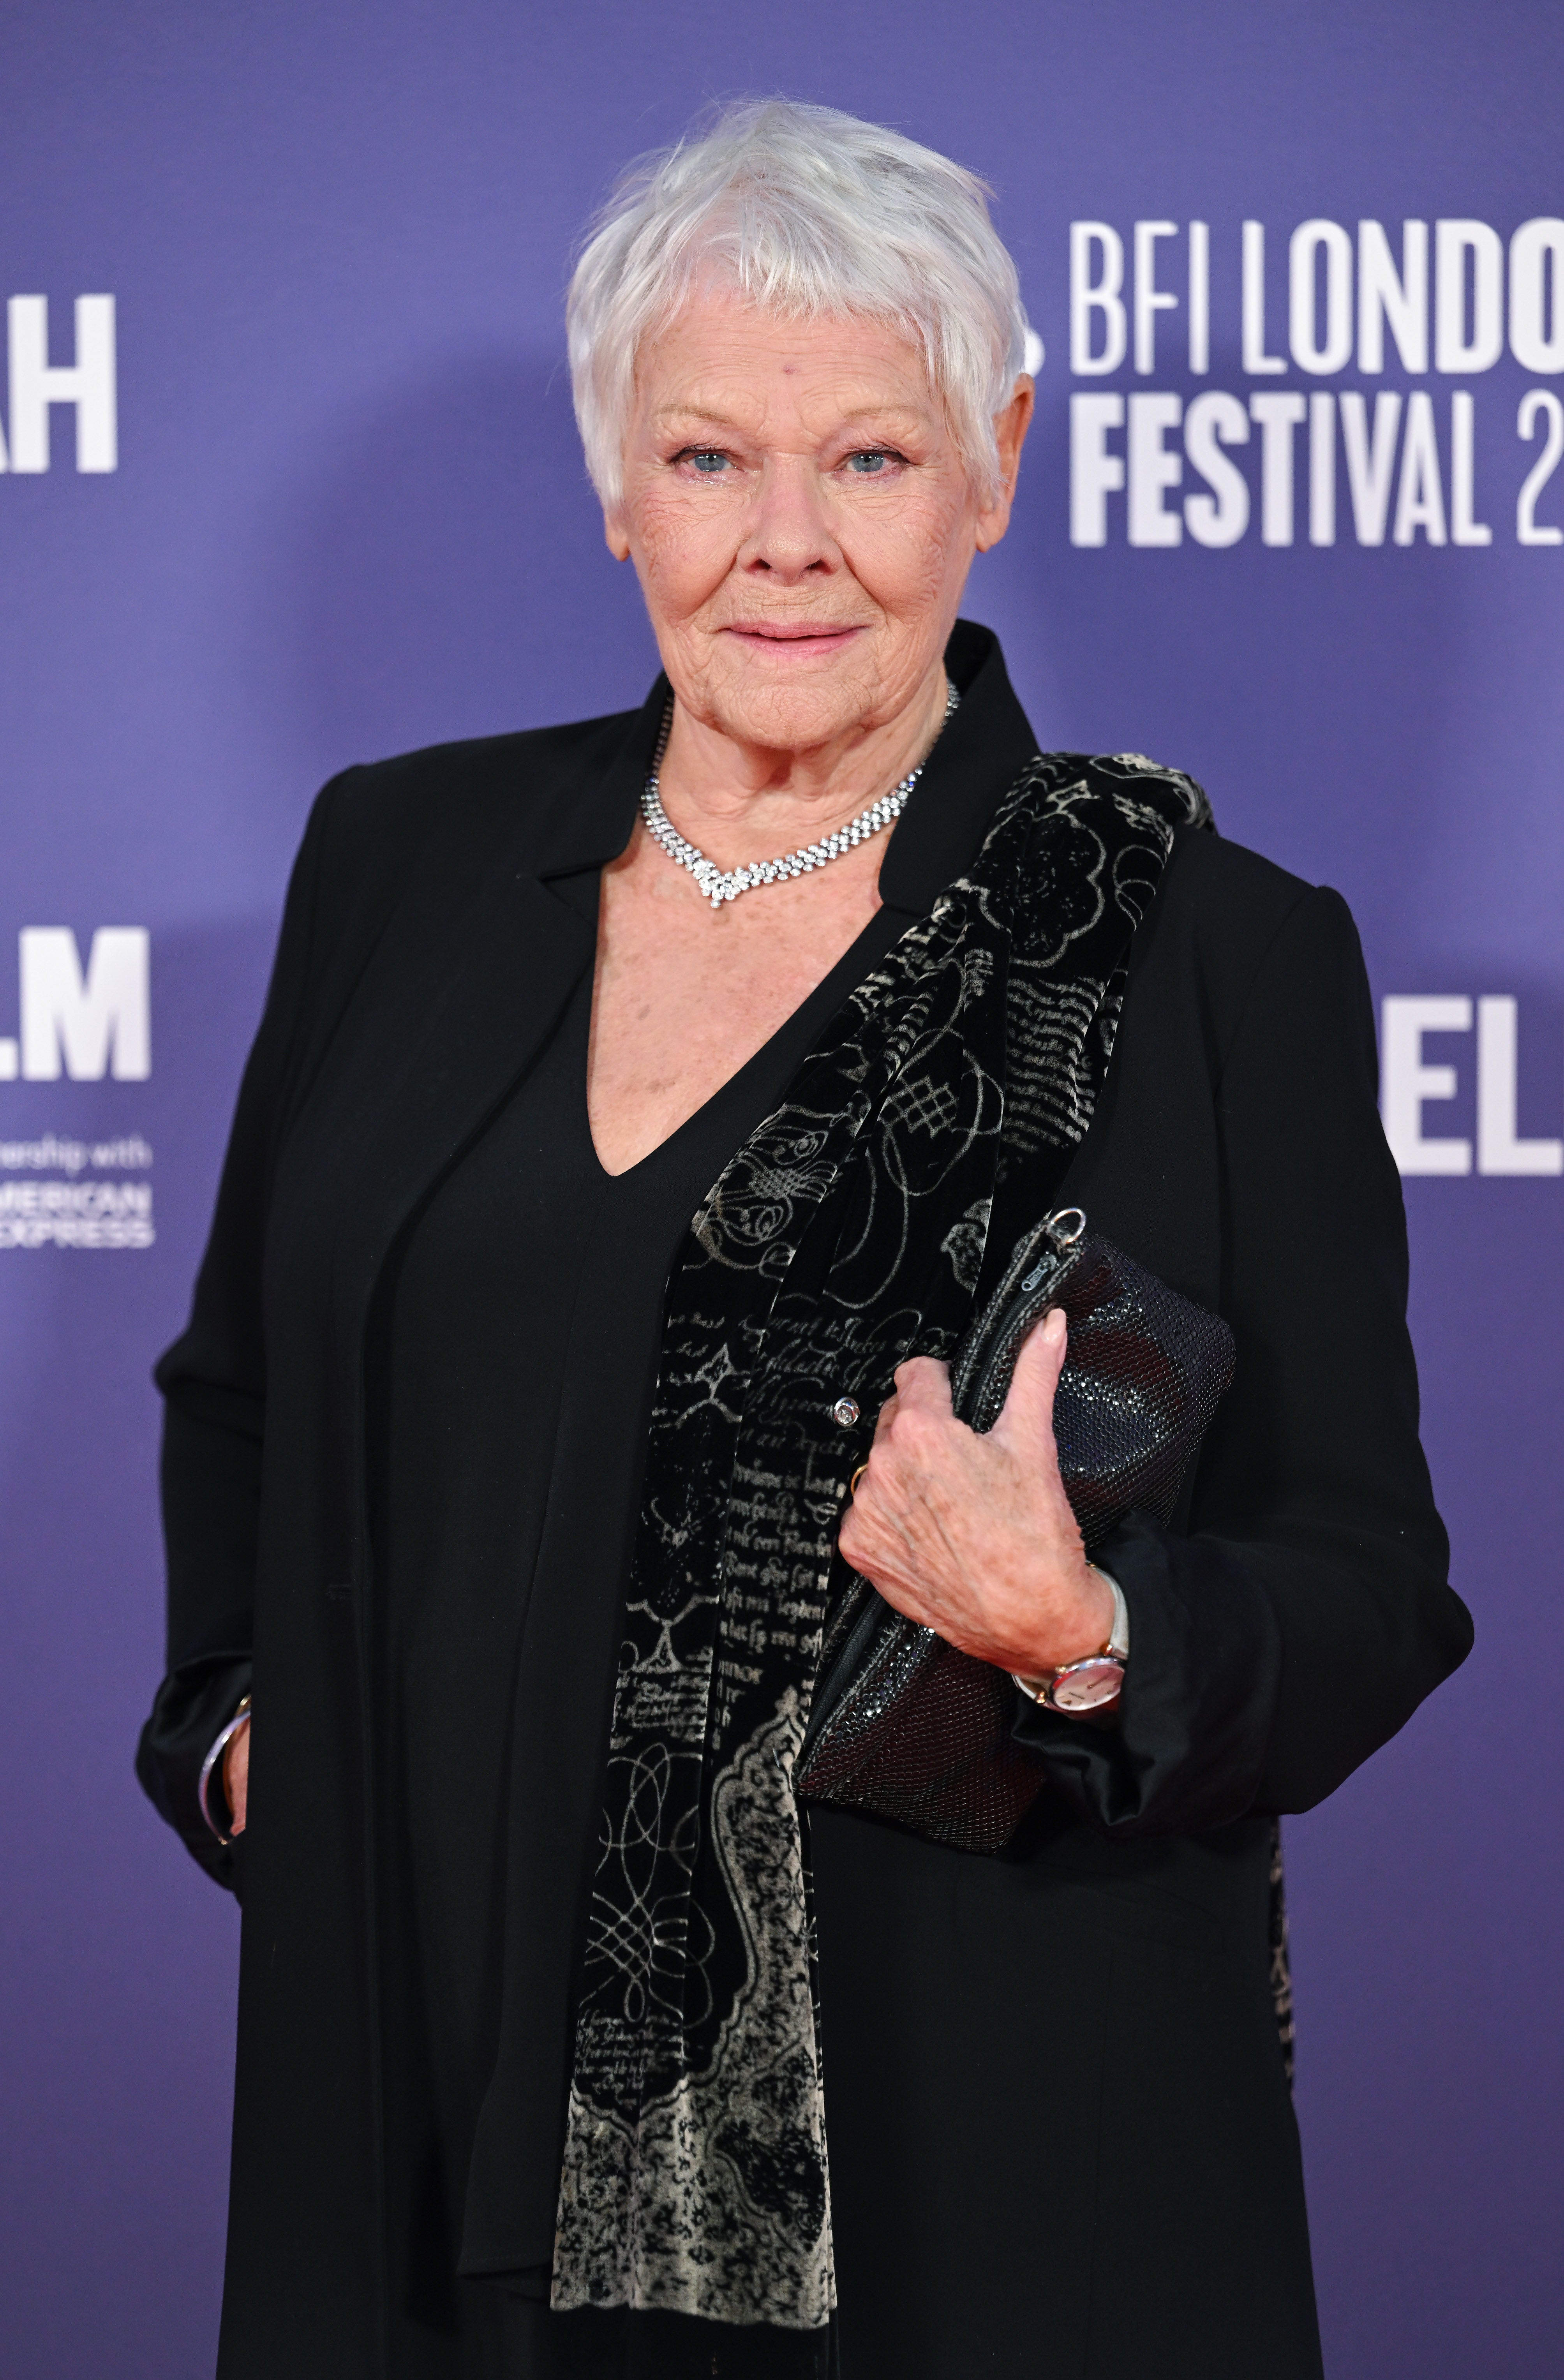 Dame Judi Dench attends the "Allelujah" European Premiere during the 66th BFI London Film Festival at Southbank Centre in London, England on October 09, 2022. | Source: Getty Images